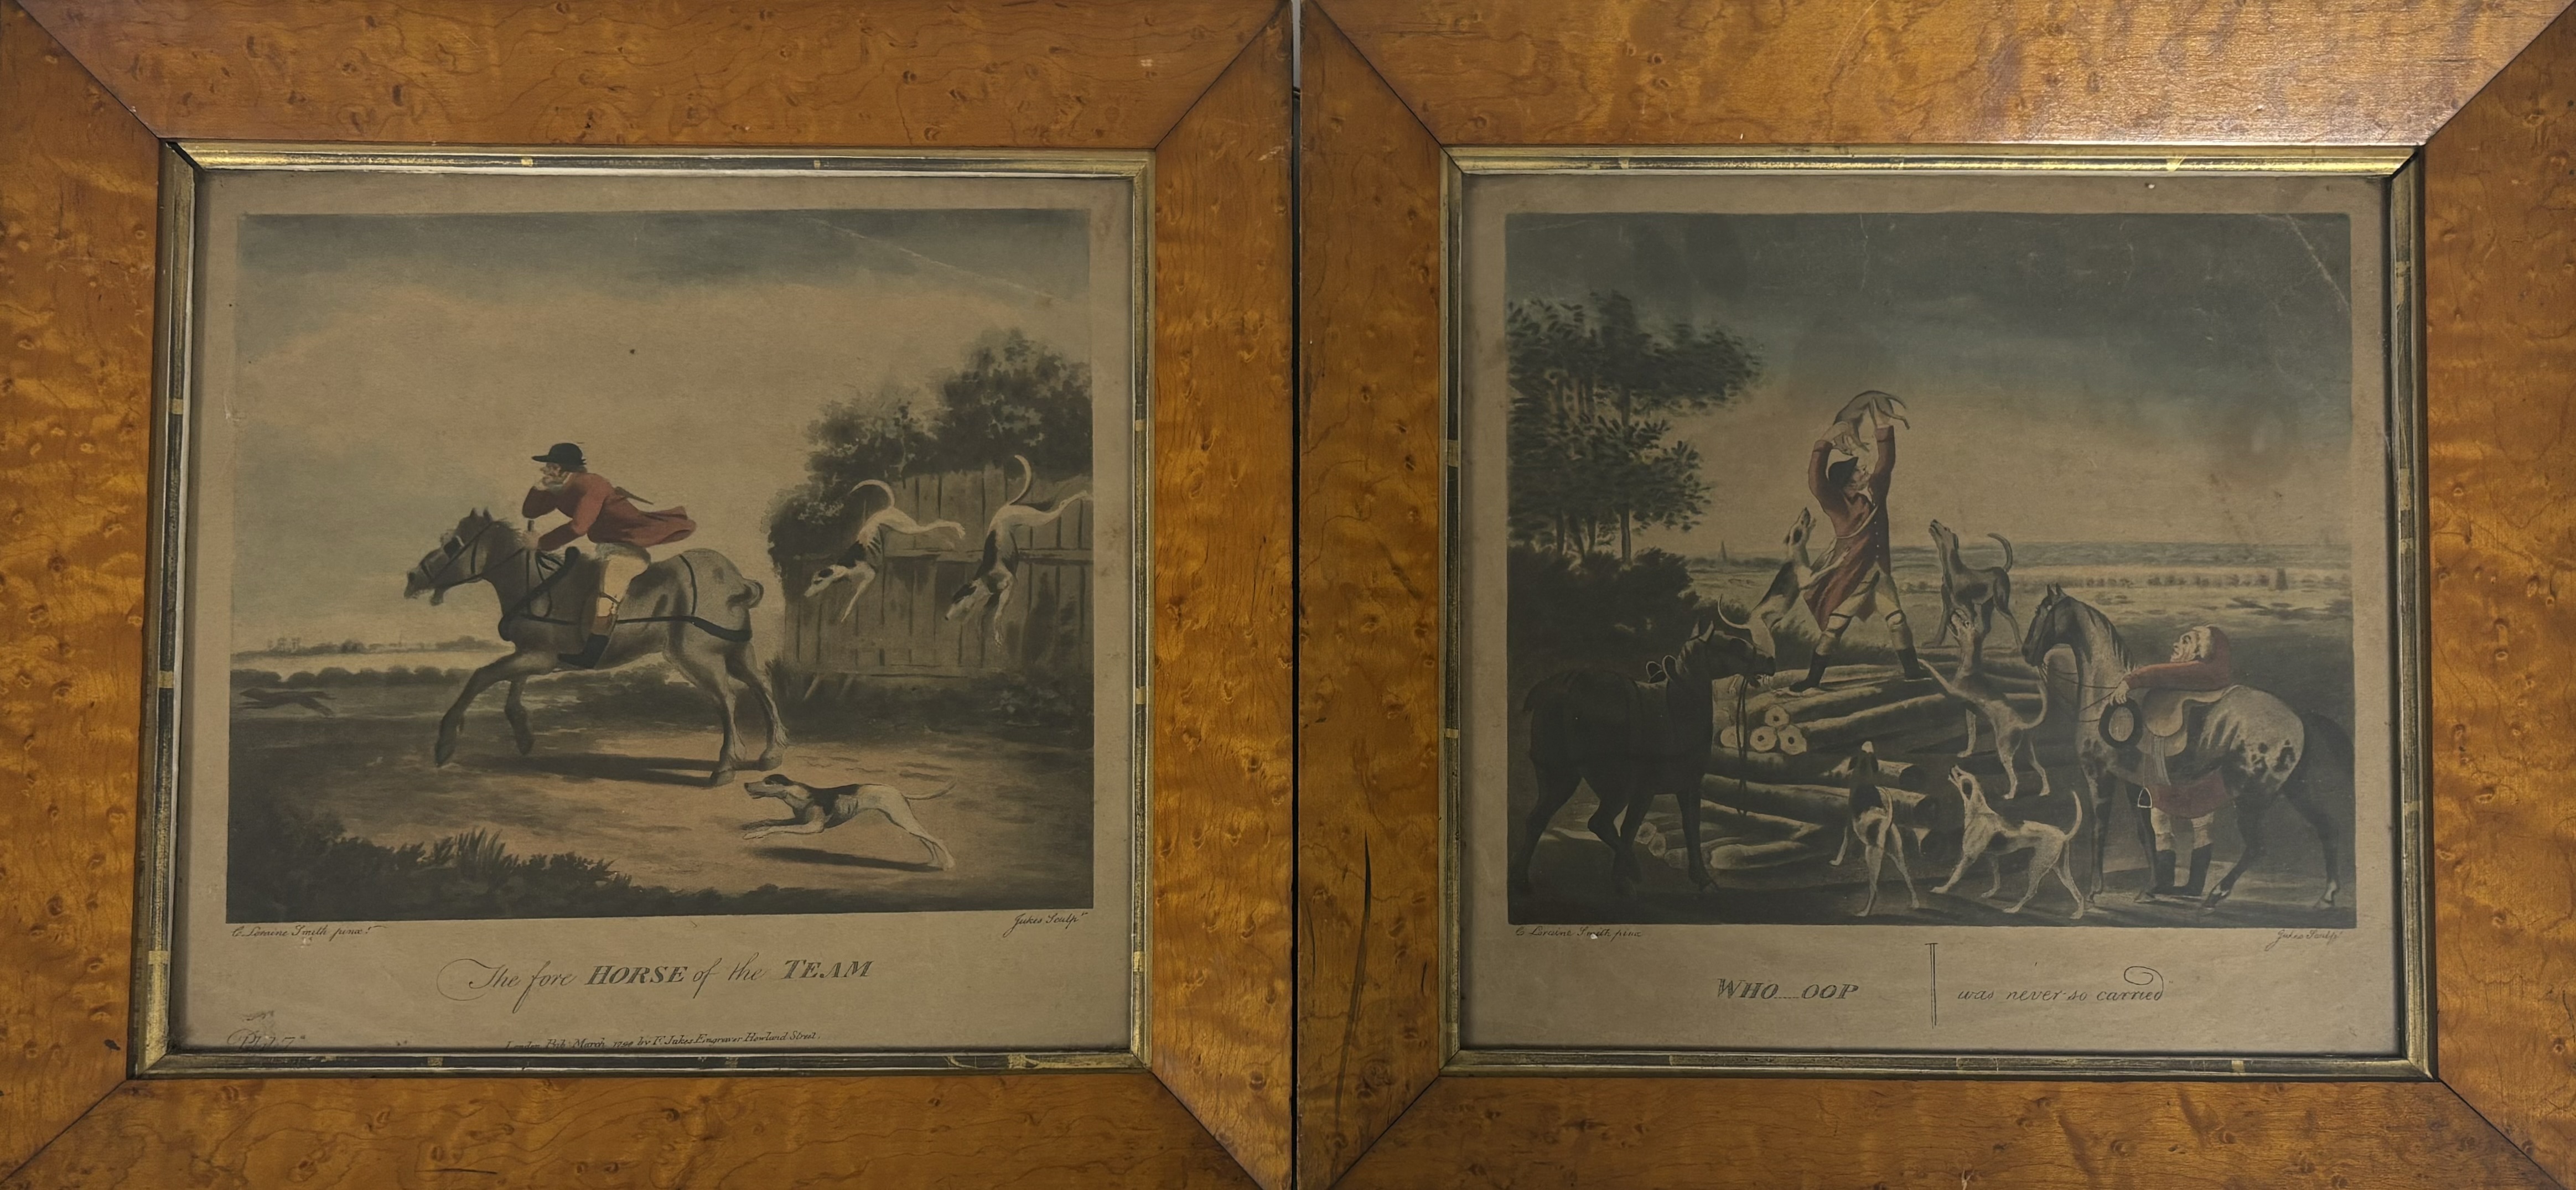 A pair of 18thc coloured engravings by Francis Jukes (1745-1812) after Charles Lorraine (after)